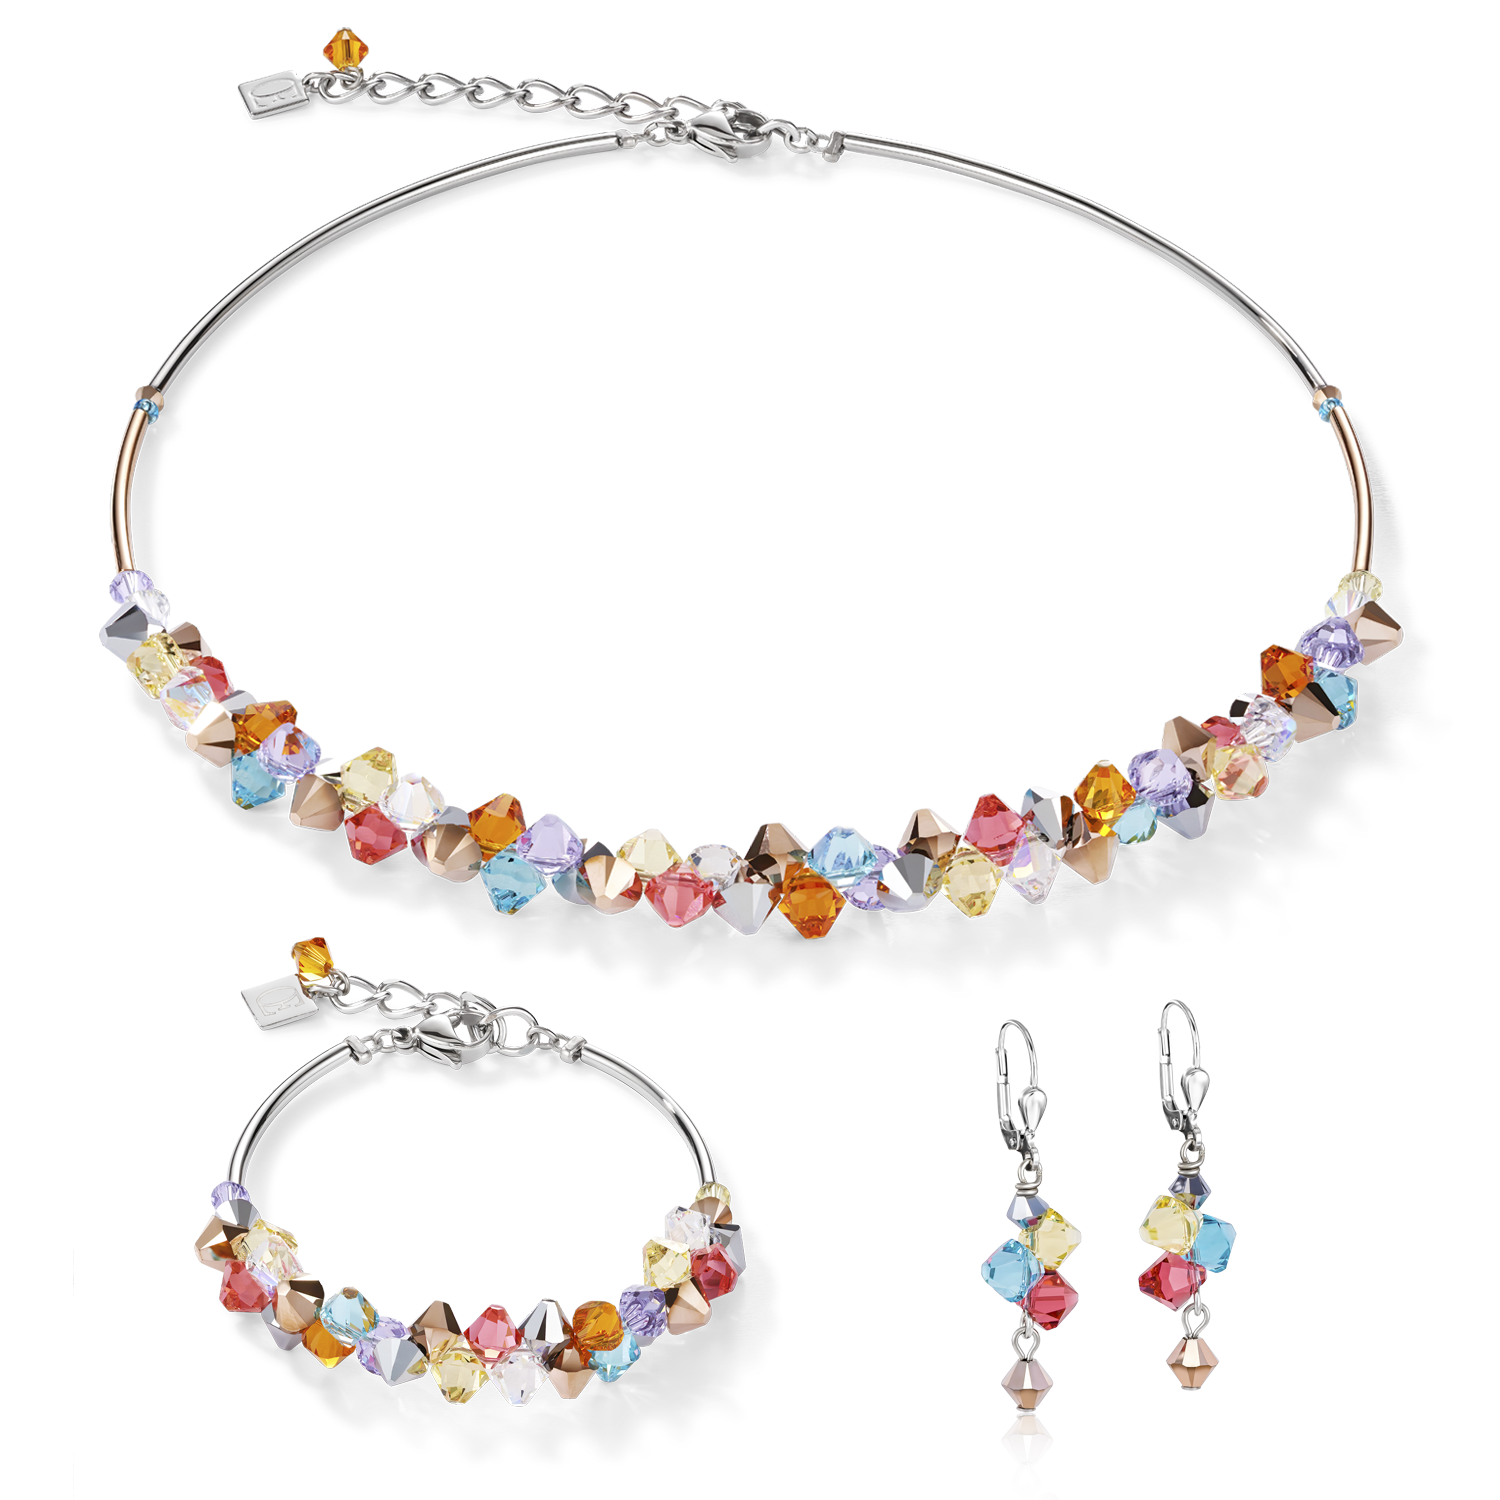 Necklace Crystals & stainless steel multicolour pastel 1